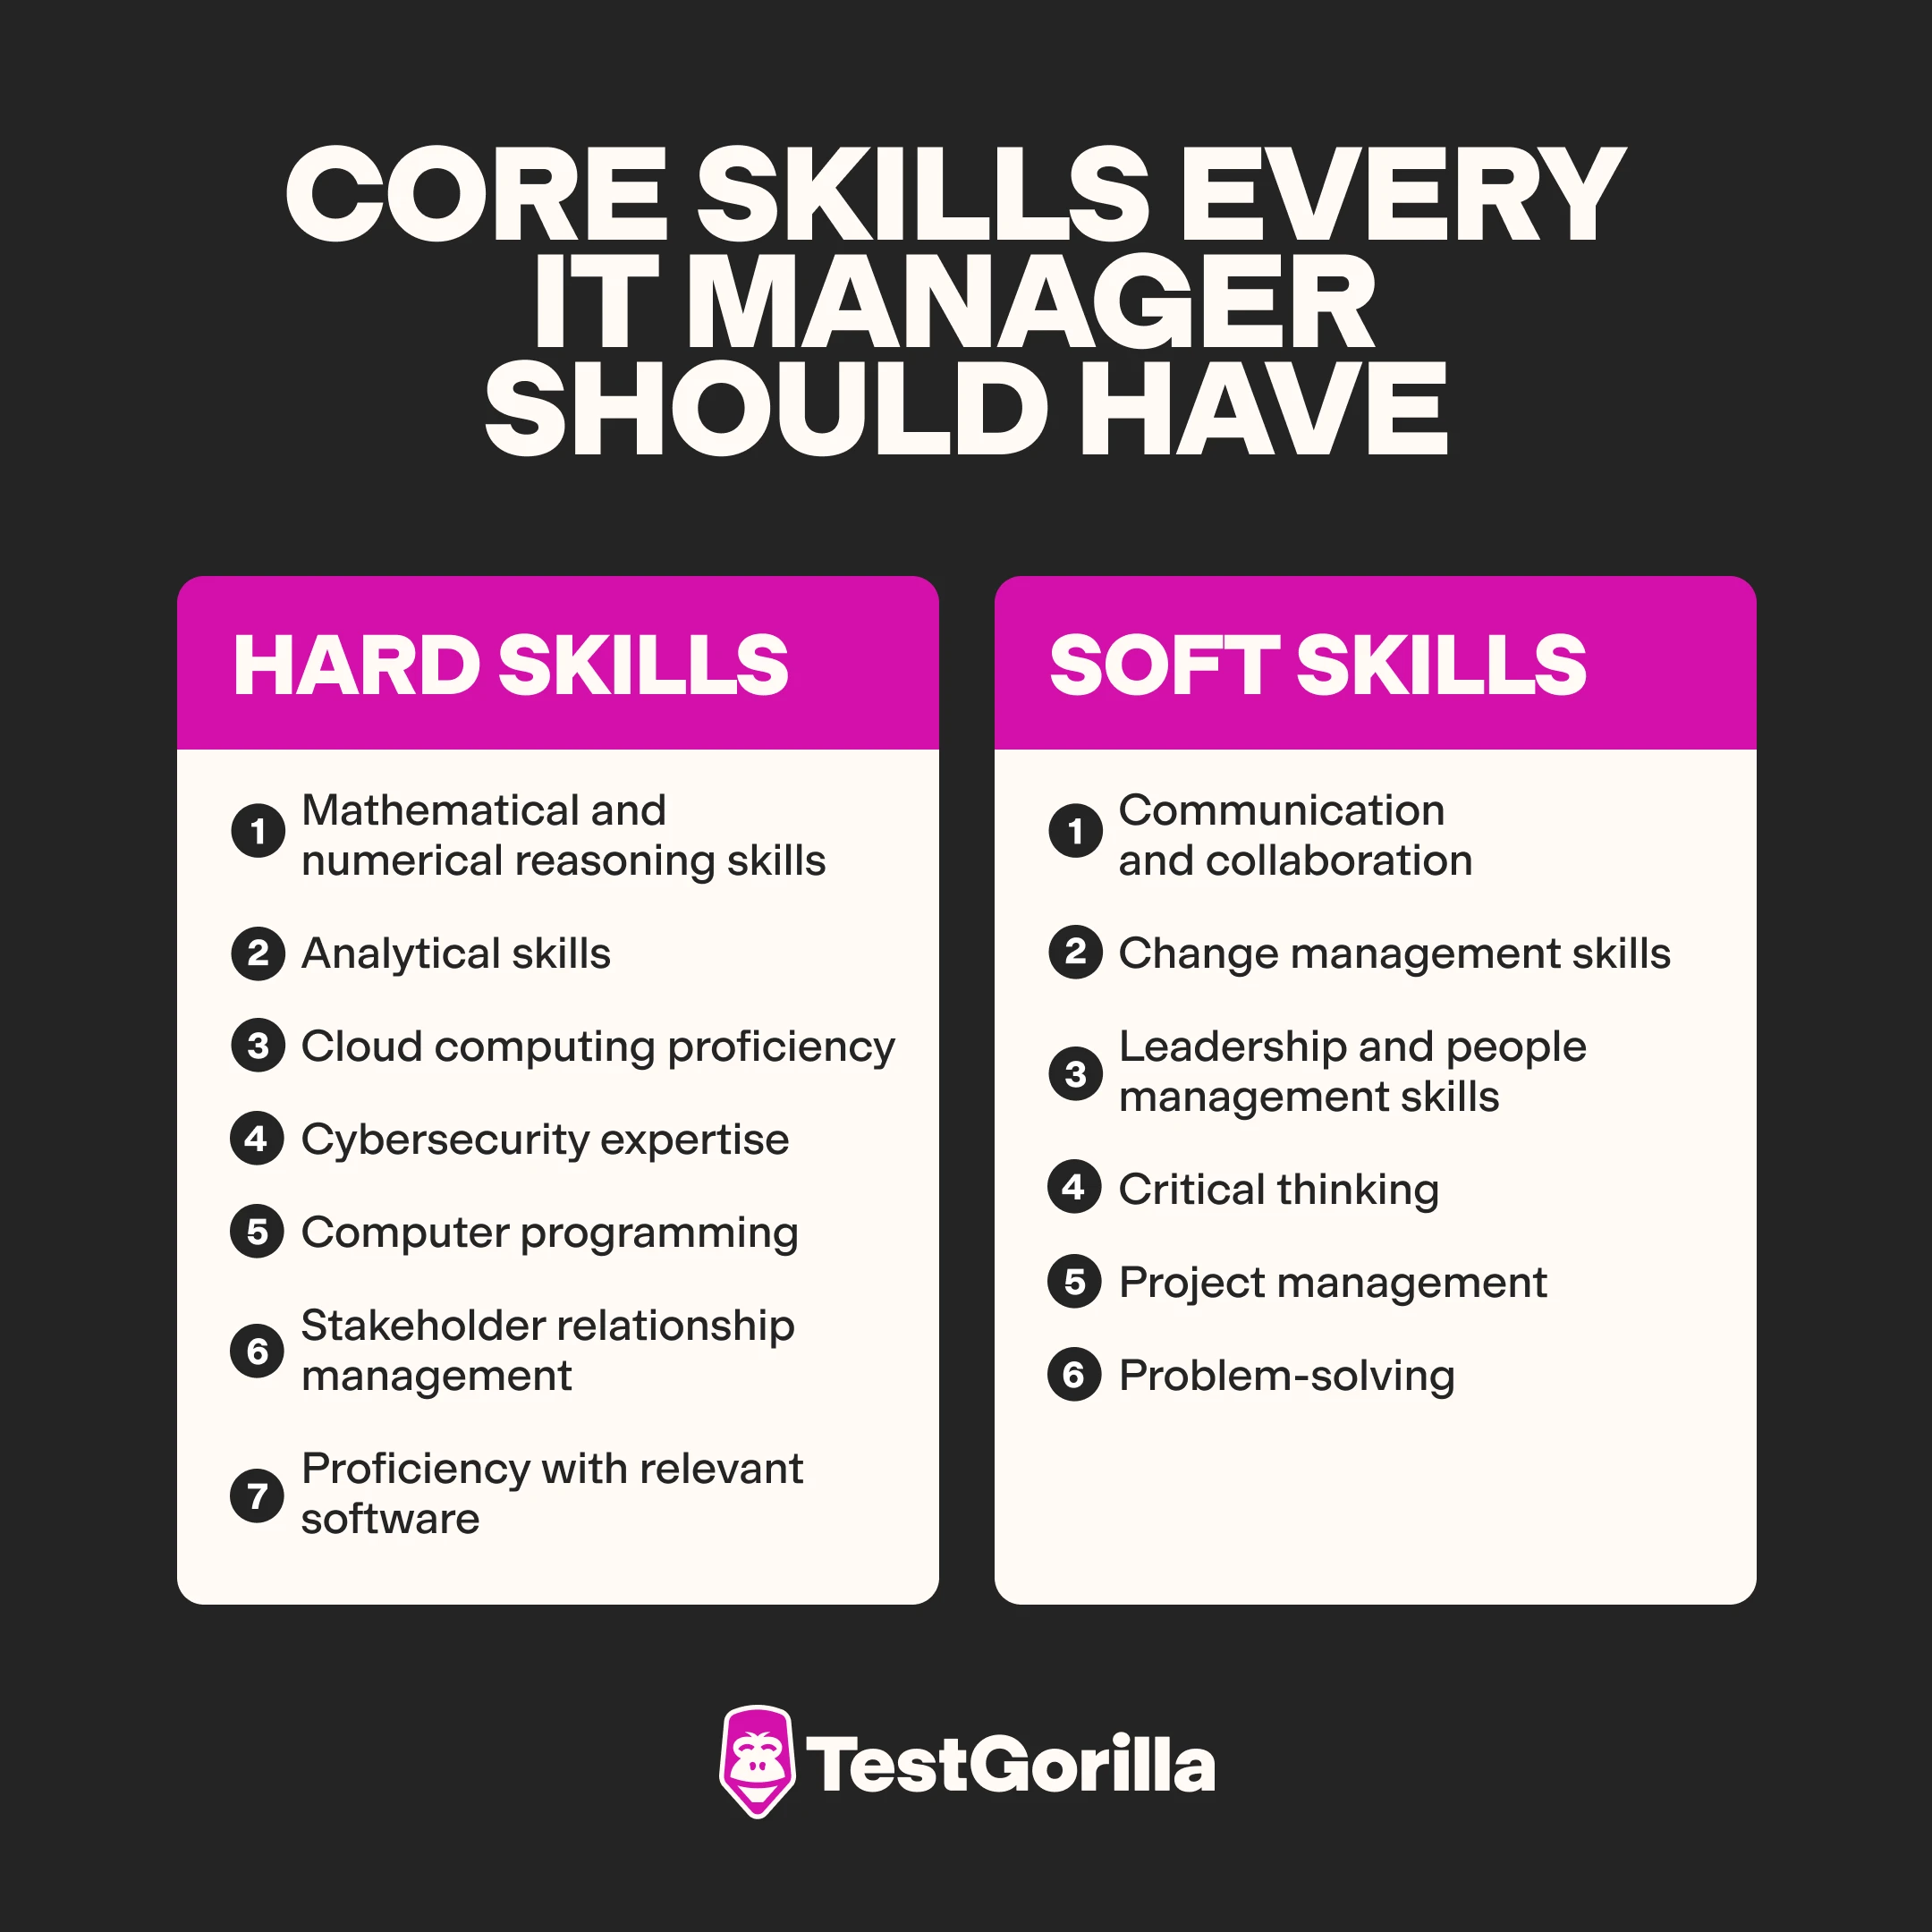 Core-skills-every-IT-manager-should-have